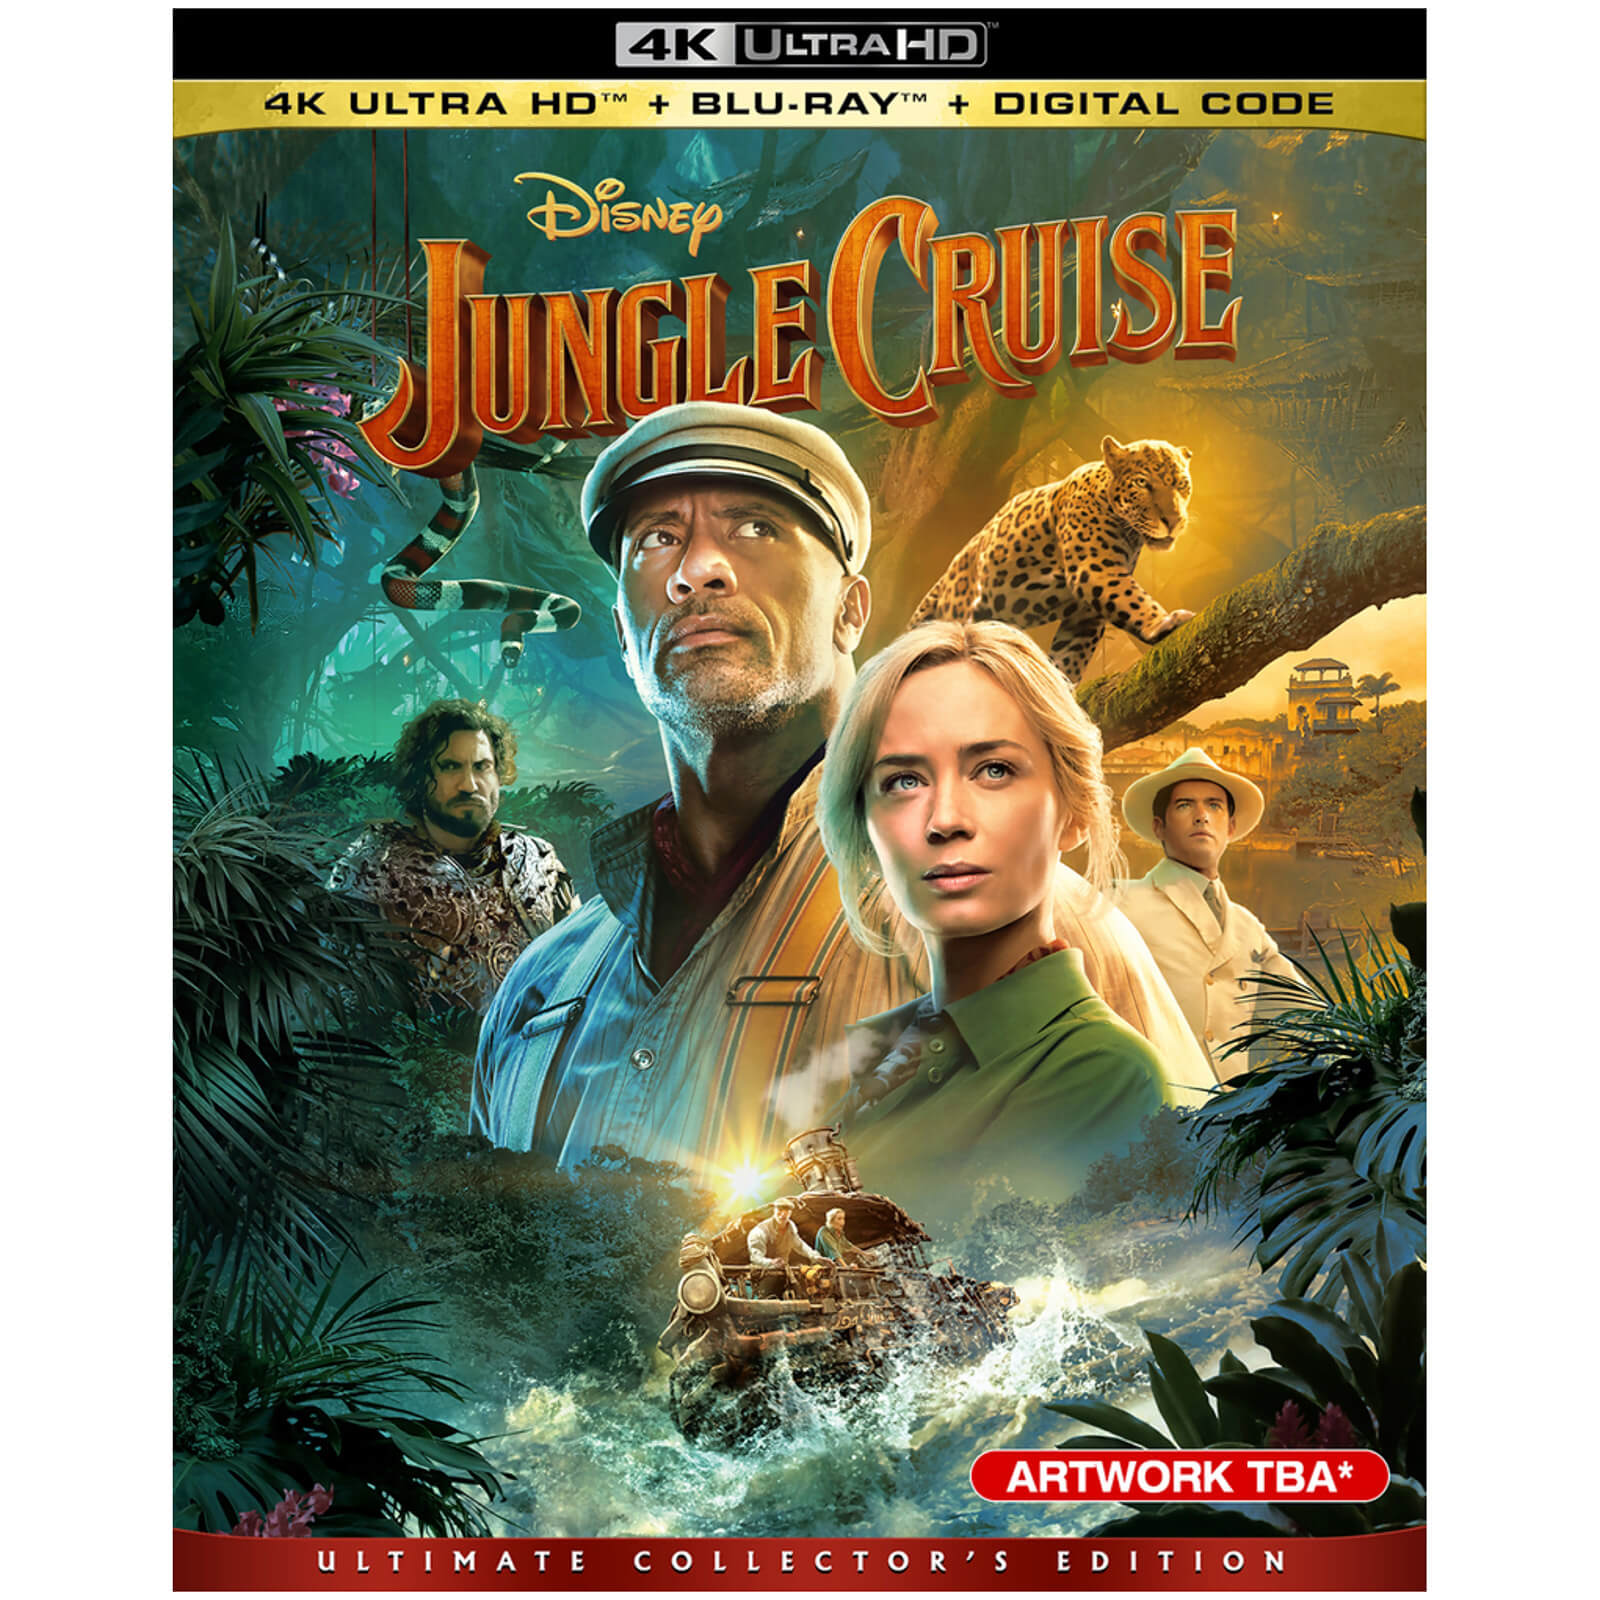 Jungle Cruise: Ultimate Collector's Edition - 4K Ultra HD (Includes Blu-ray)